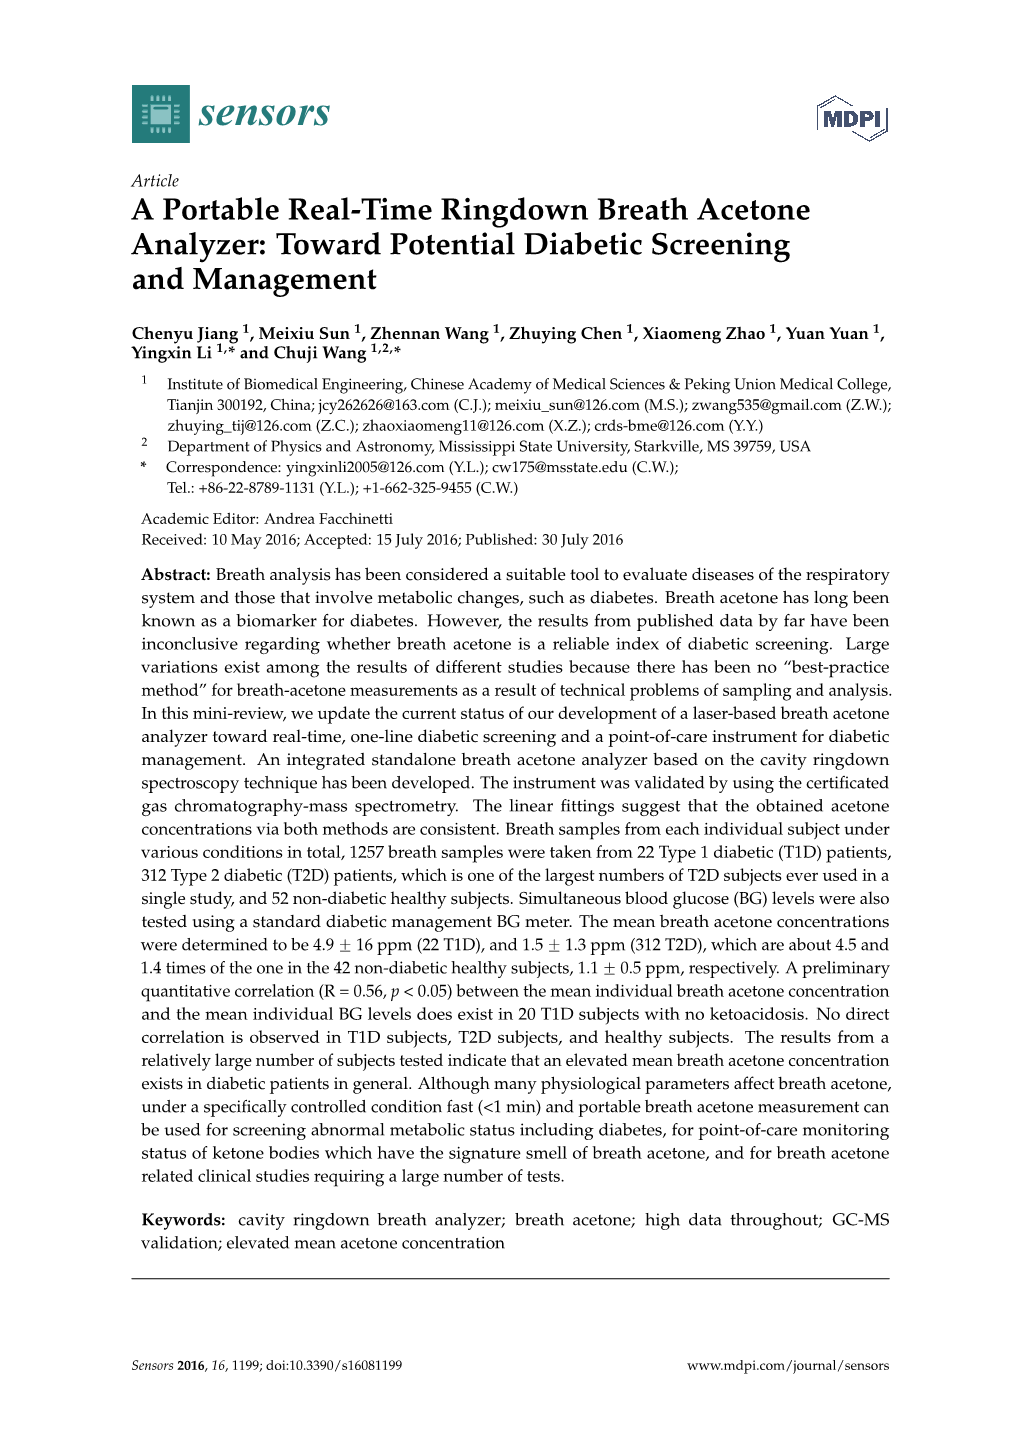 A Portable Real-Time Ringdown Breath Acetone Analyzer: Toward Potential Diabetic Screening and Management